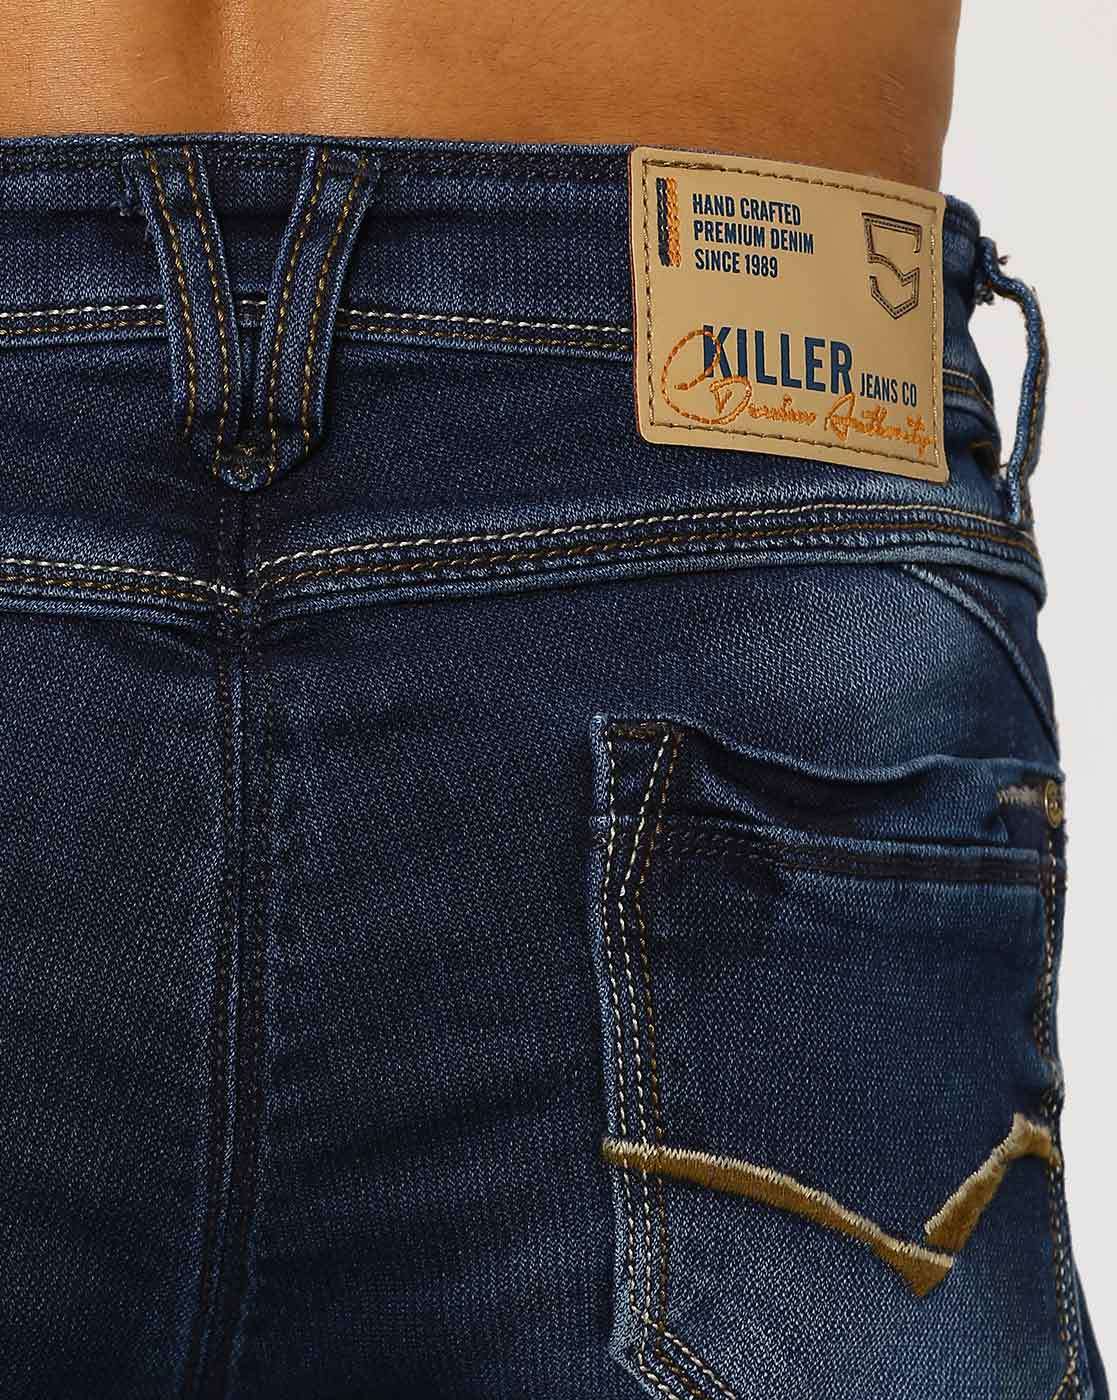 Killer Jeans Projects :: Photos, videos, logos, illustrations and branding  :: Behance